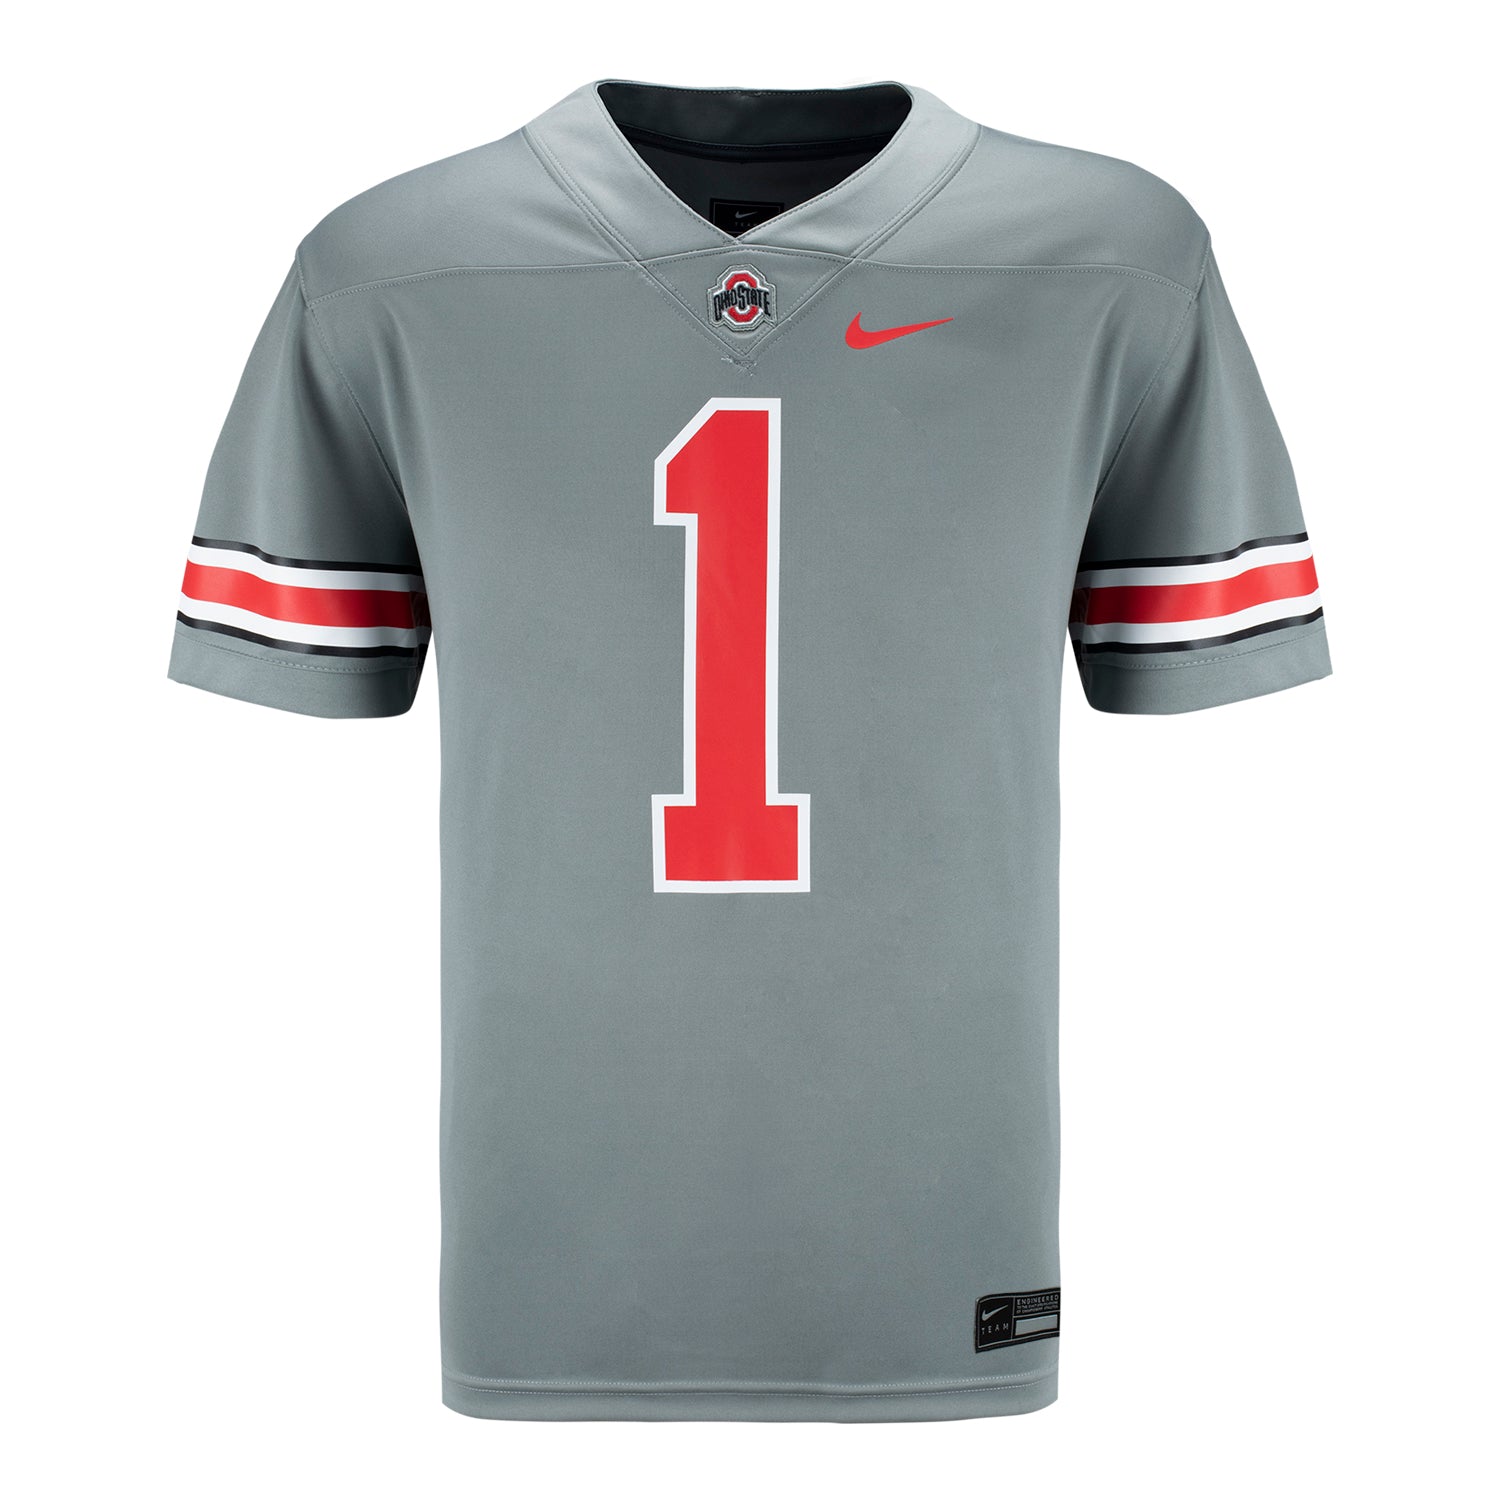 Men's Ohio State Buckeyes Personalized Nike Red Game Jersey / Small